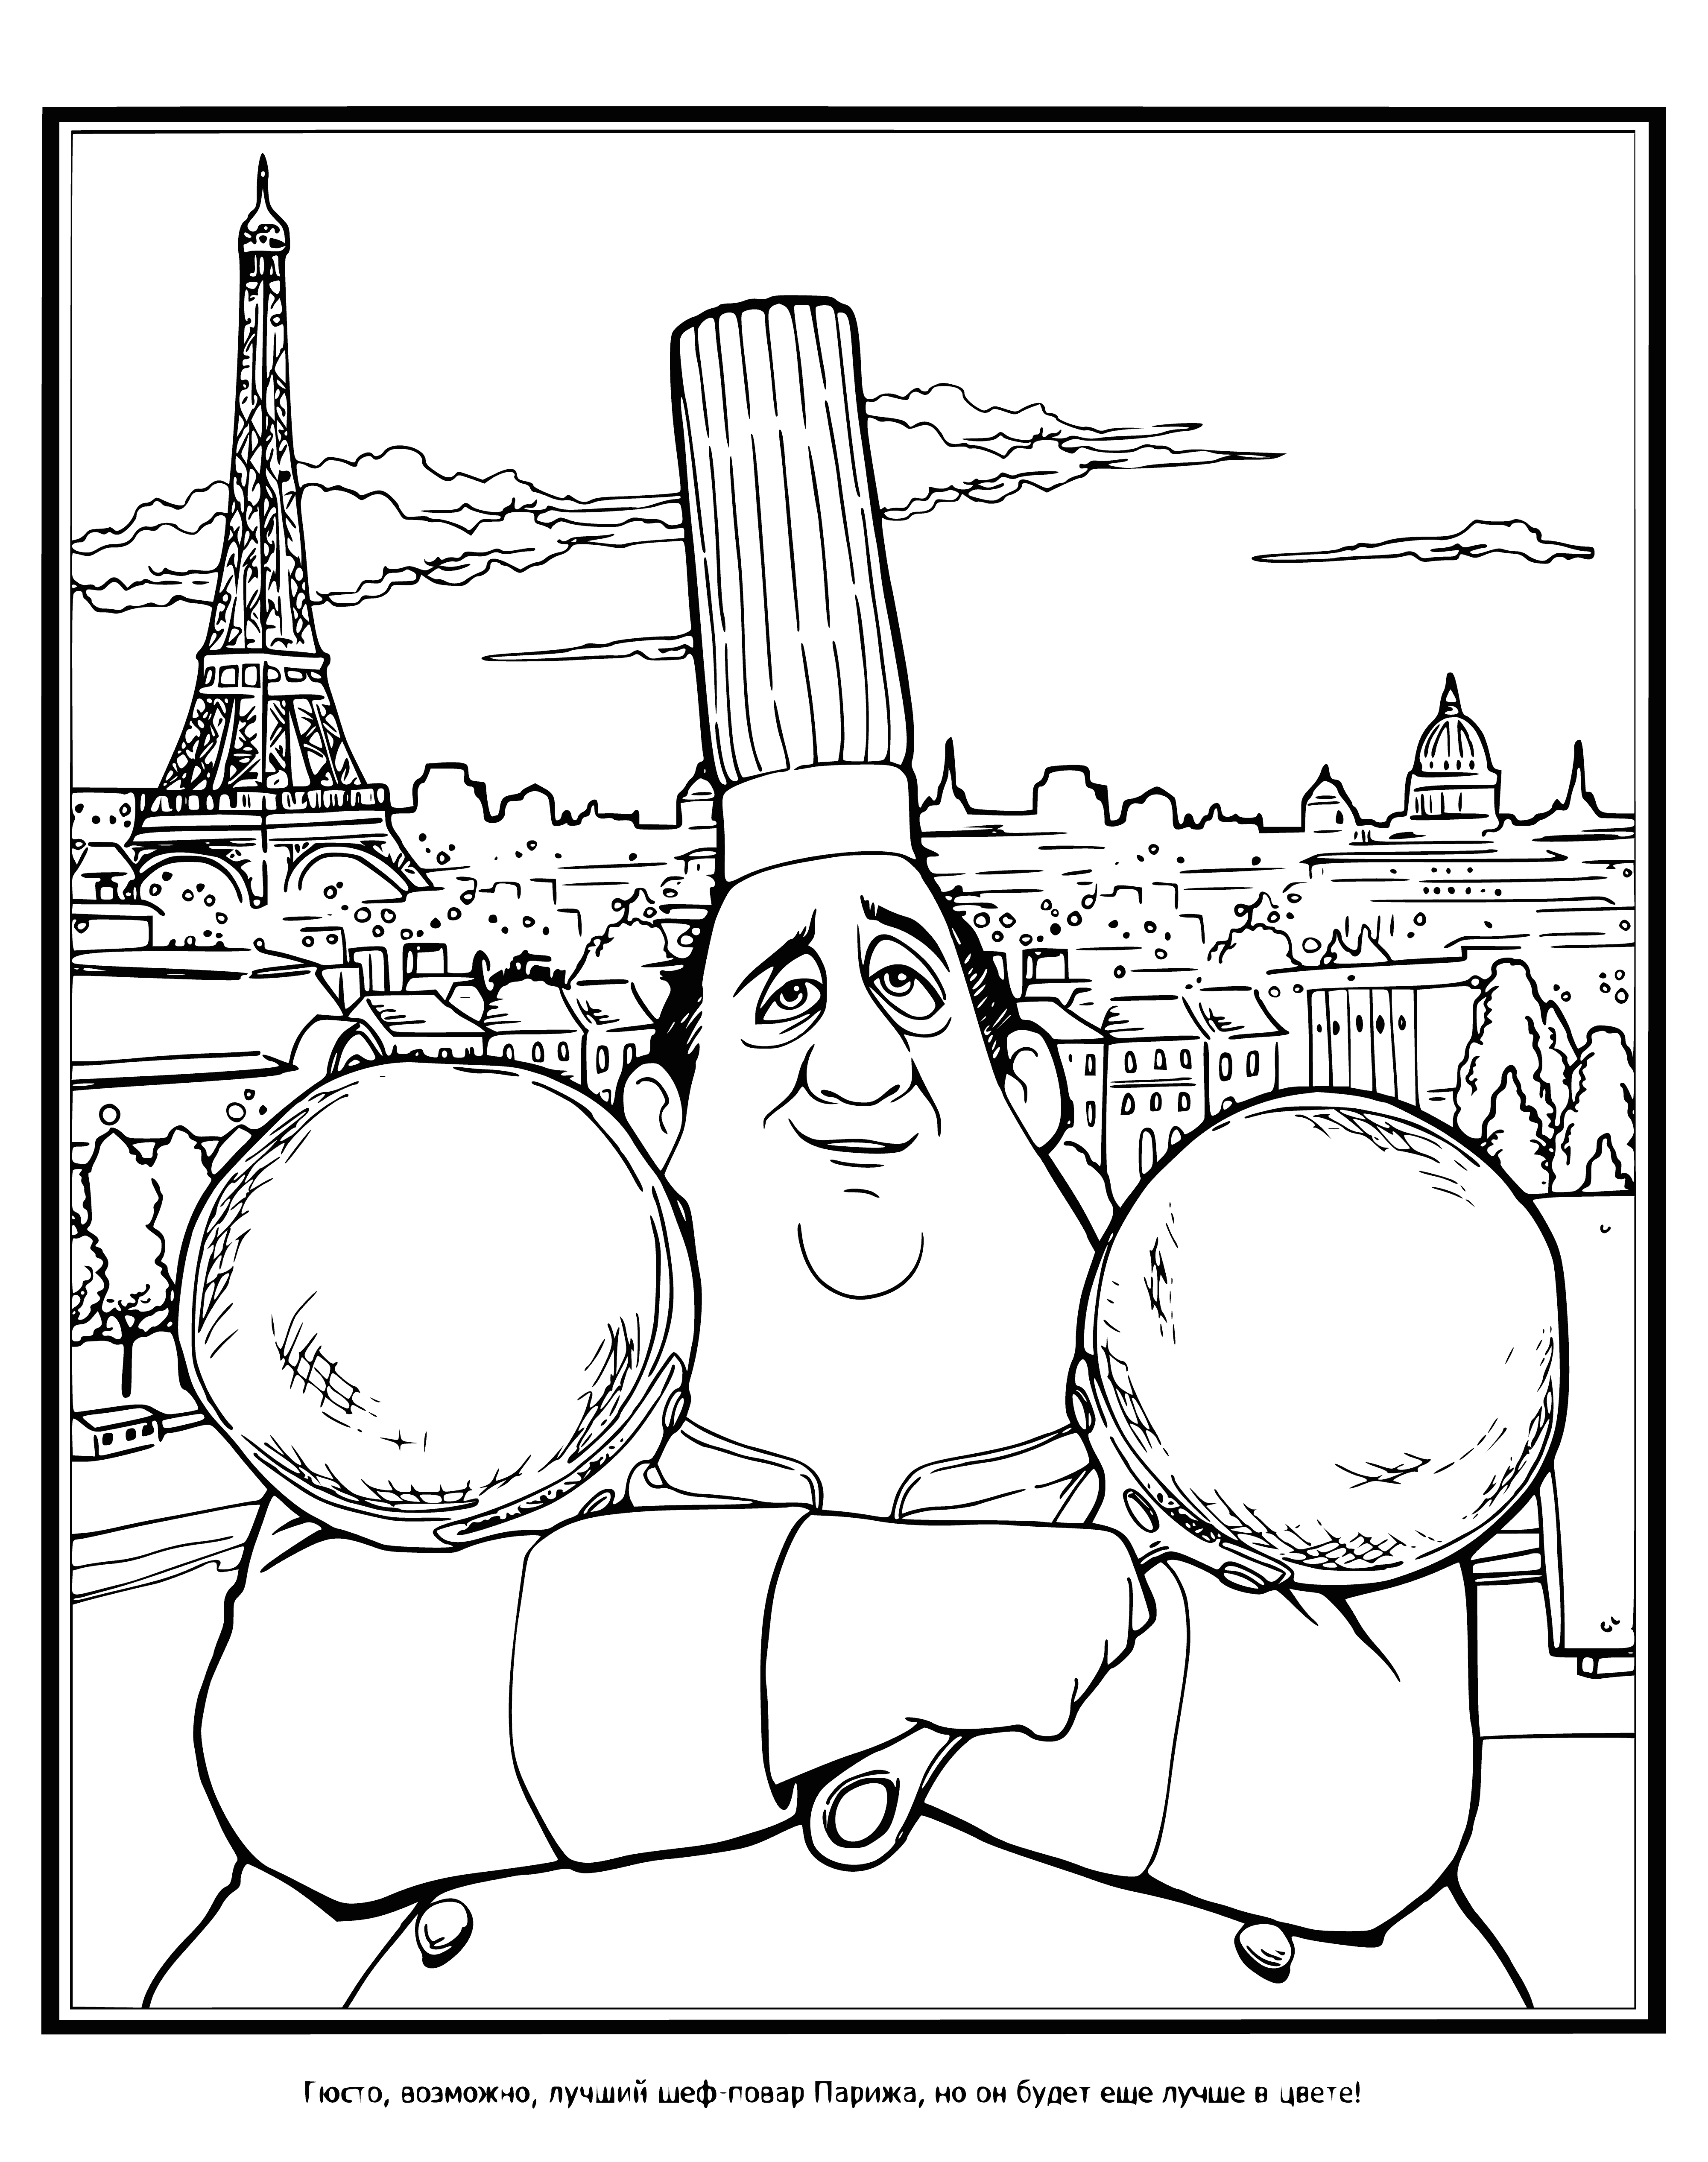 coloring page: Chef rat stands on its hind legs stirring a pot on the stove in a coloring page. Wearing a chef's hat & large mustache.